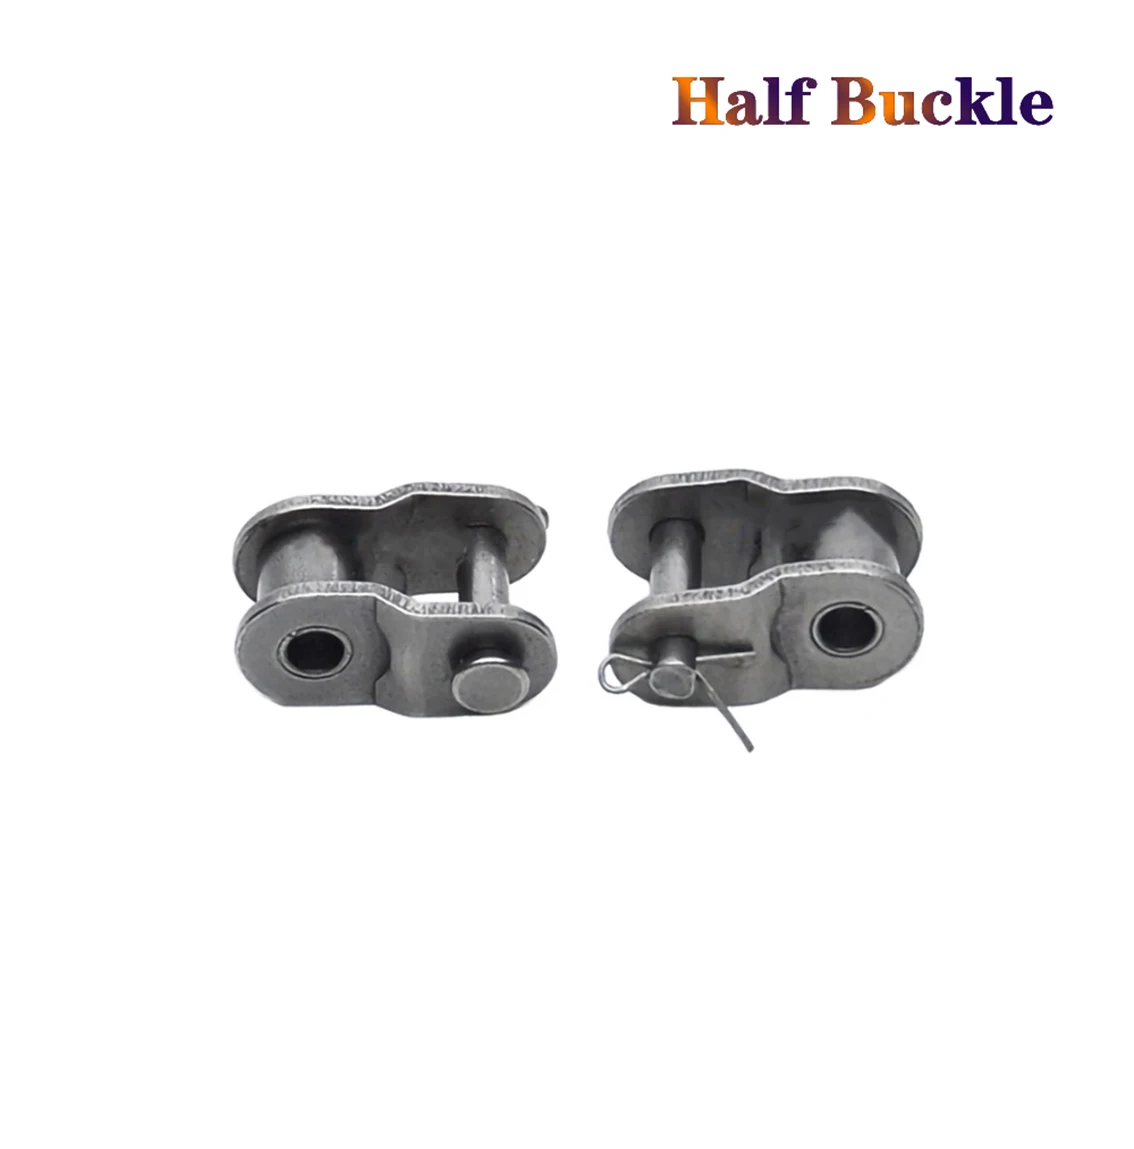 06B/08B/10A/12A/16A/08A/06C-1 Roller Chain Connector Carbon Steel Chain Half /Full Buckle Roller Industrial Chain Join Buckle